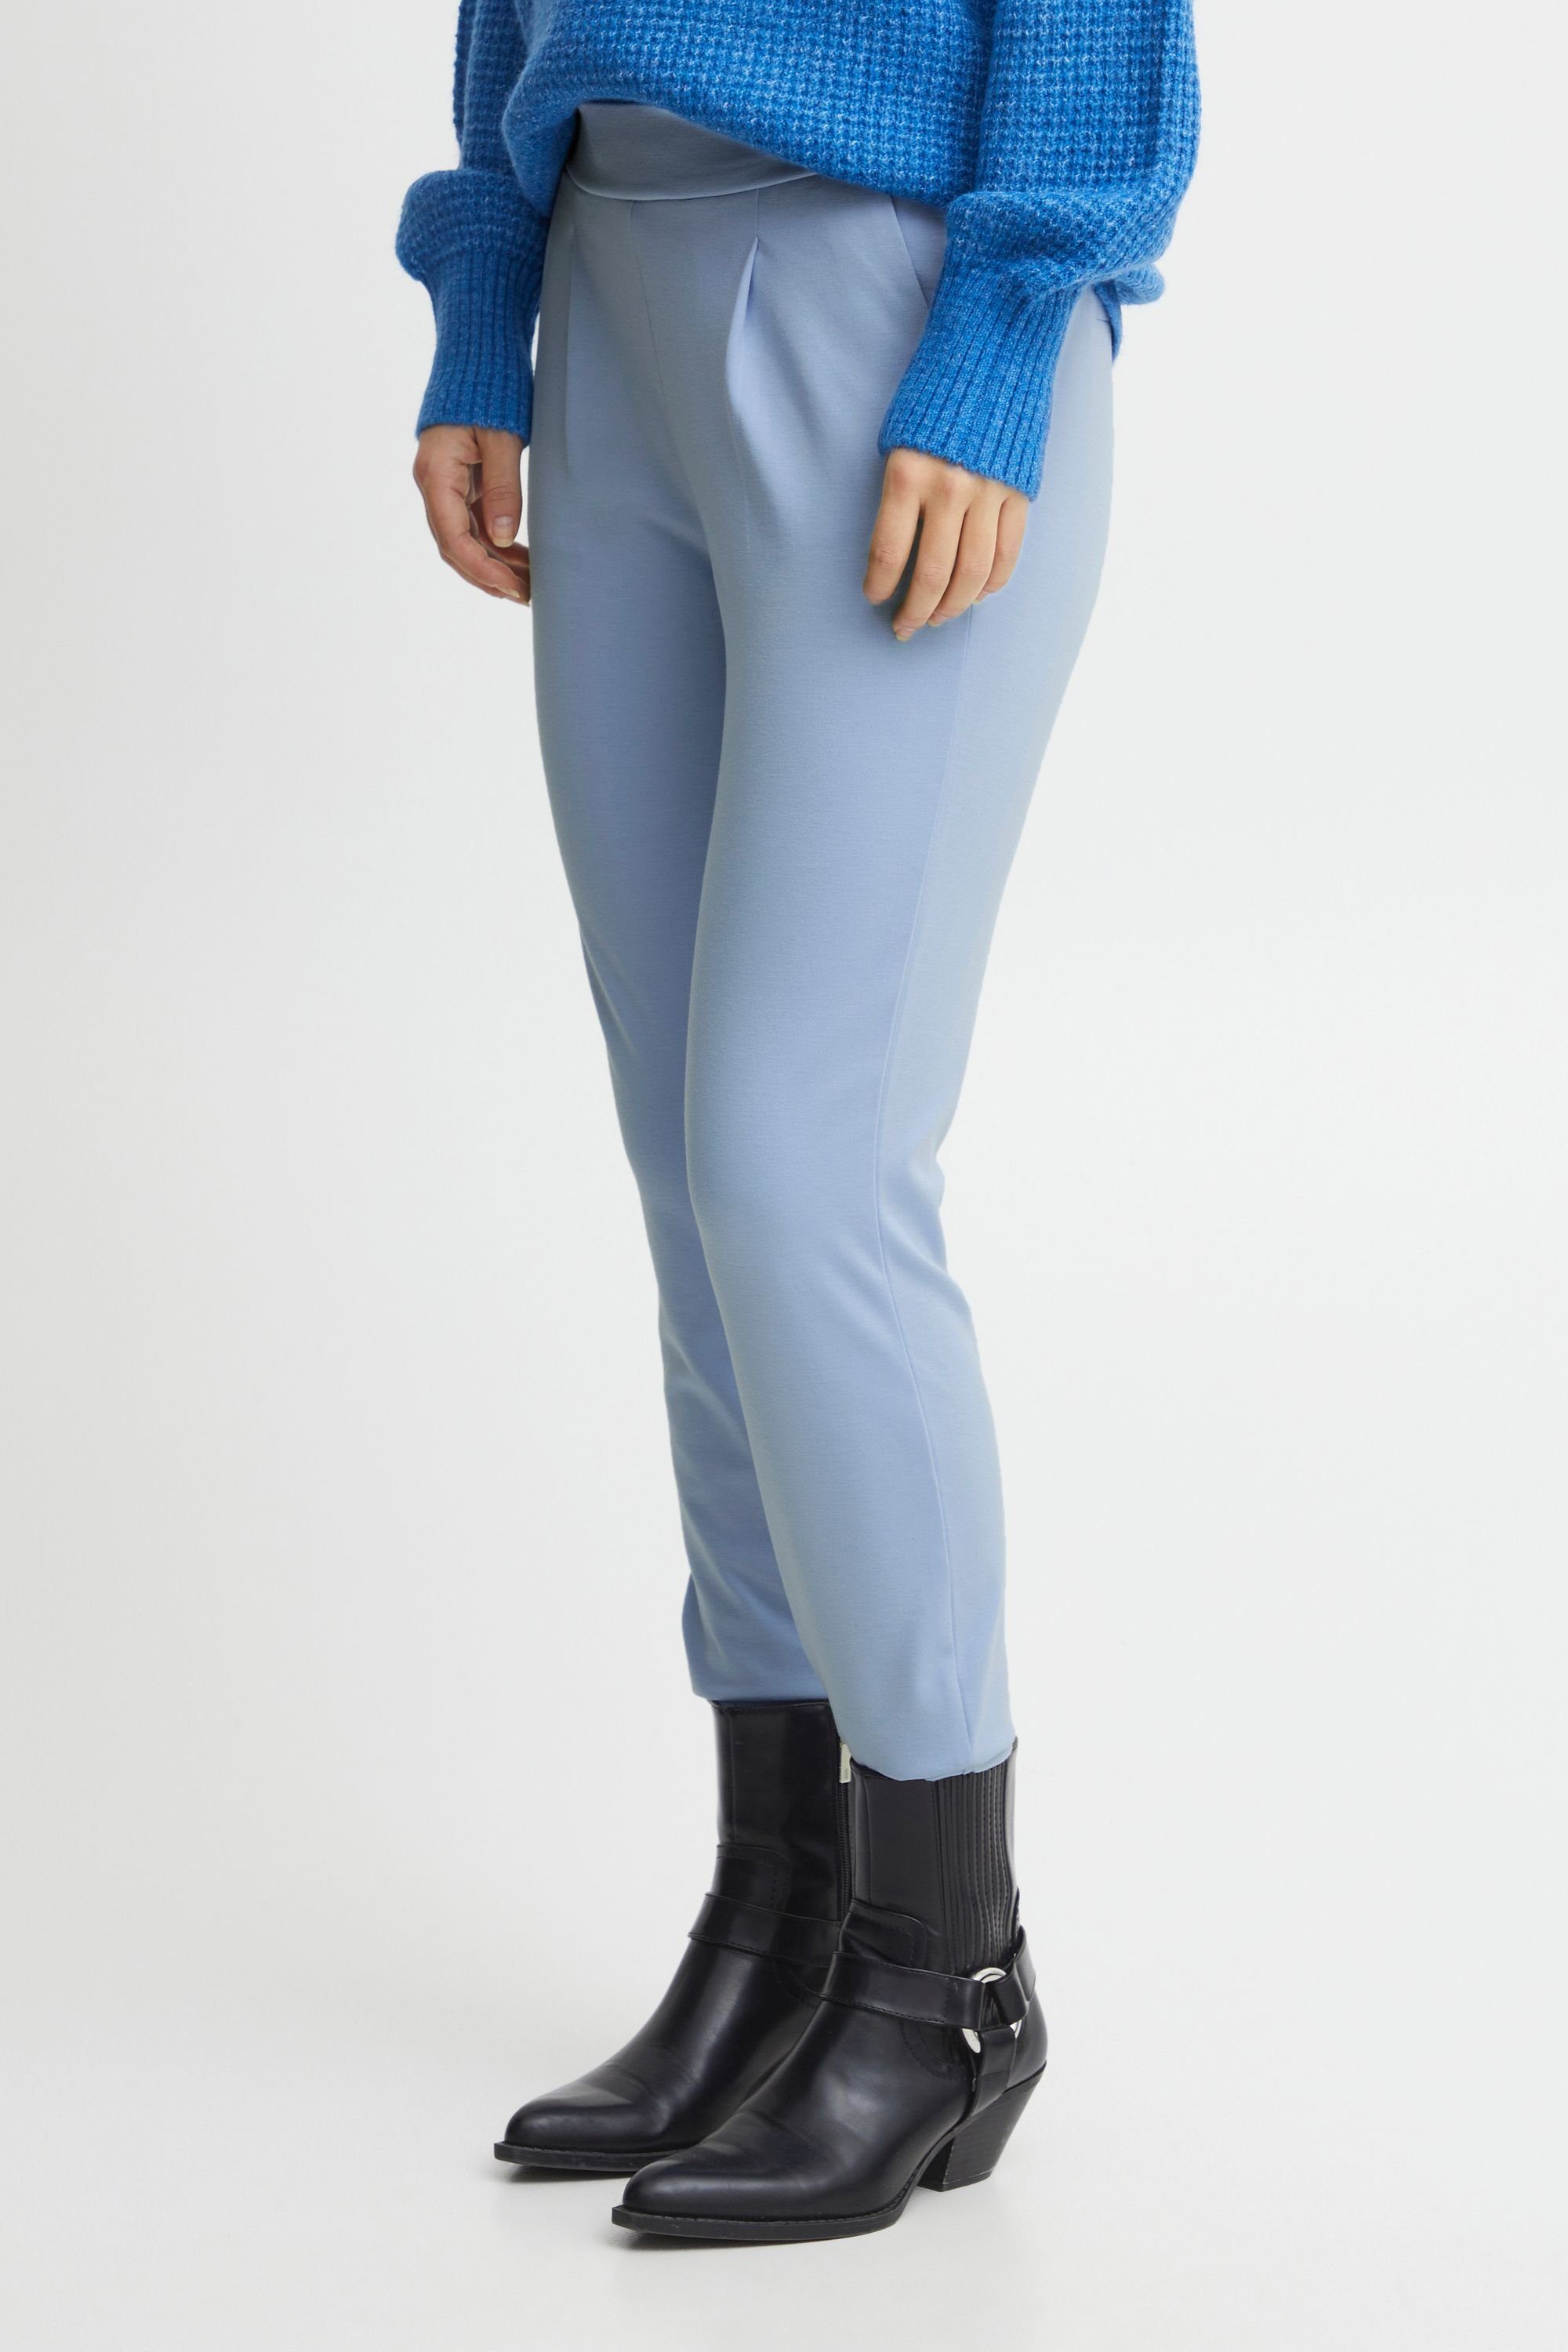 b.young Stoffhose BYRIZETTA PLEAT Blue PANTS - (144121) 20812848 Bell